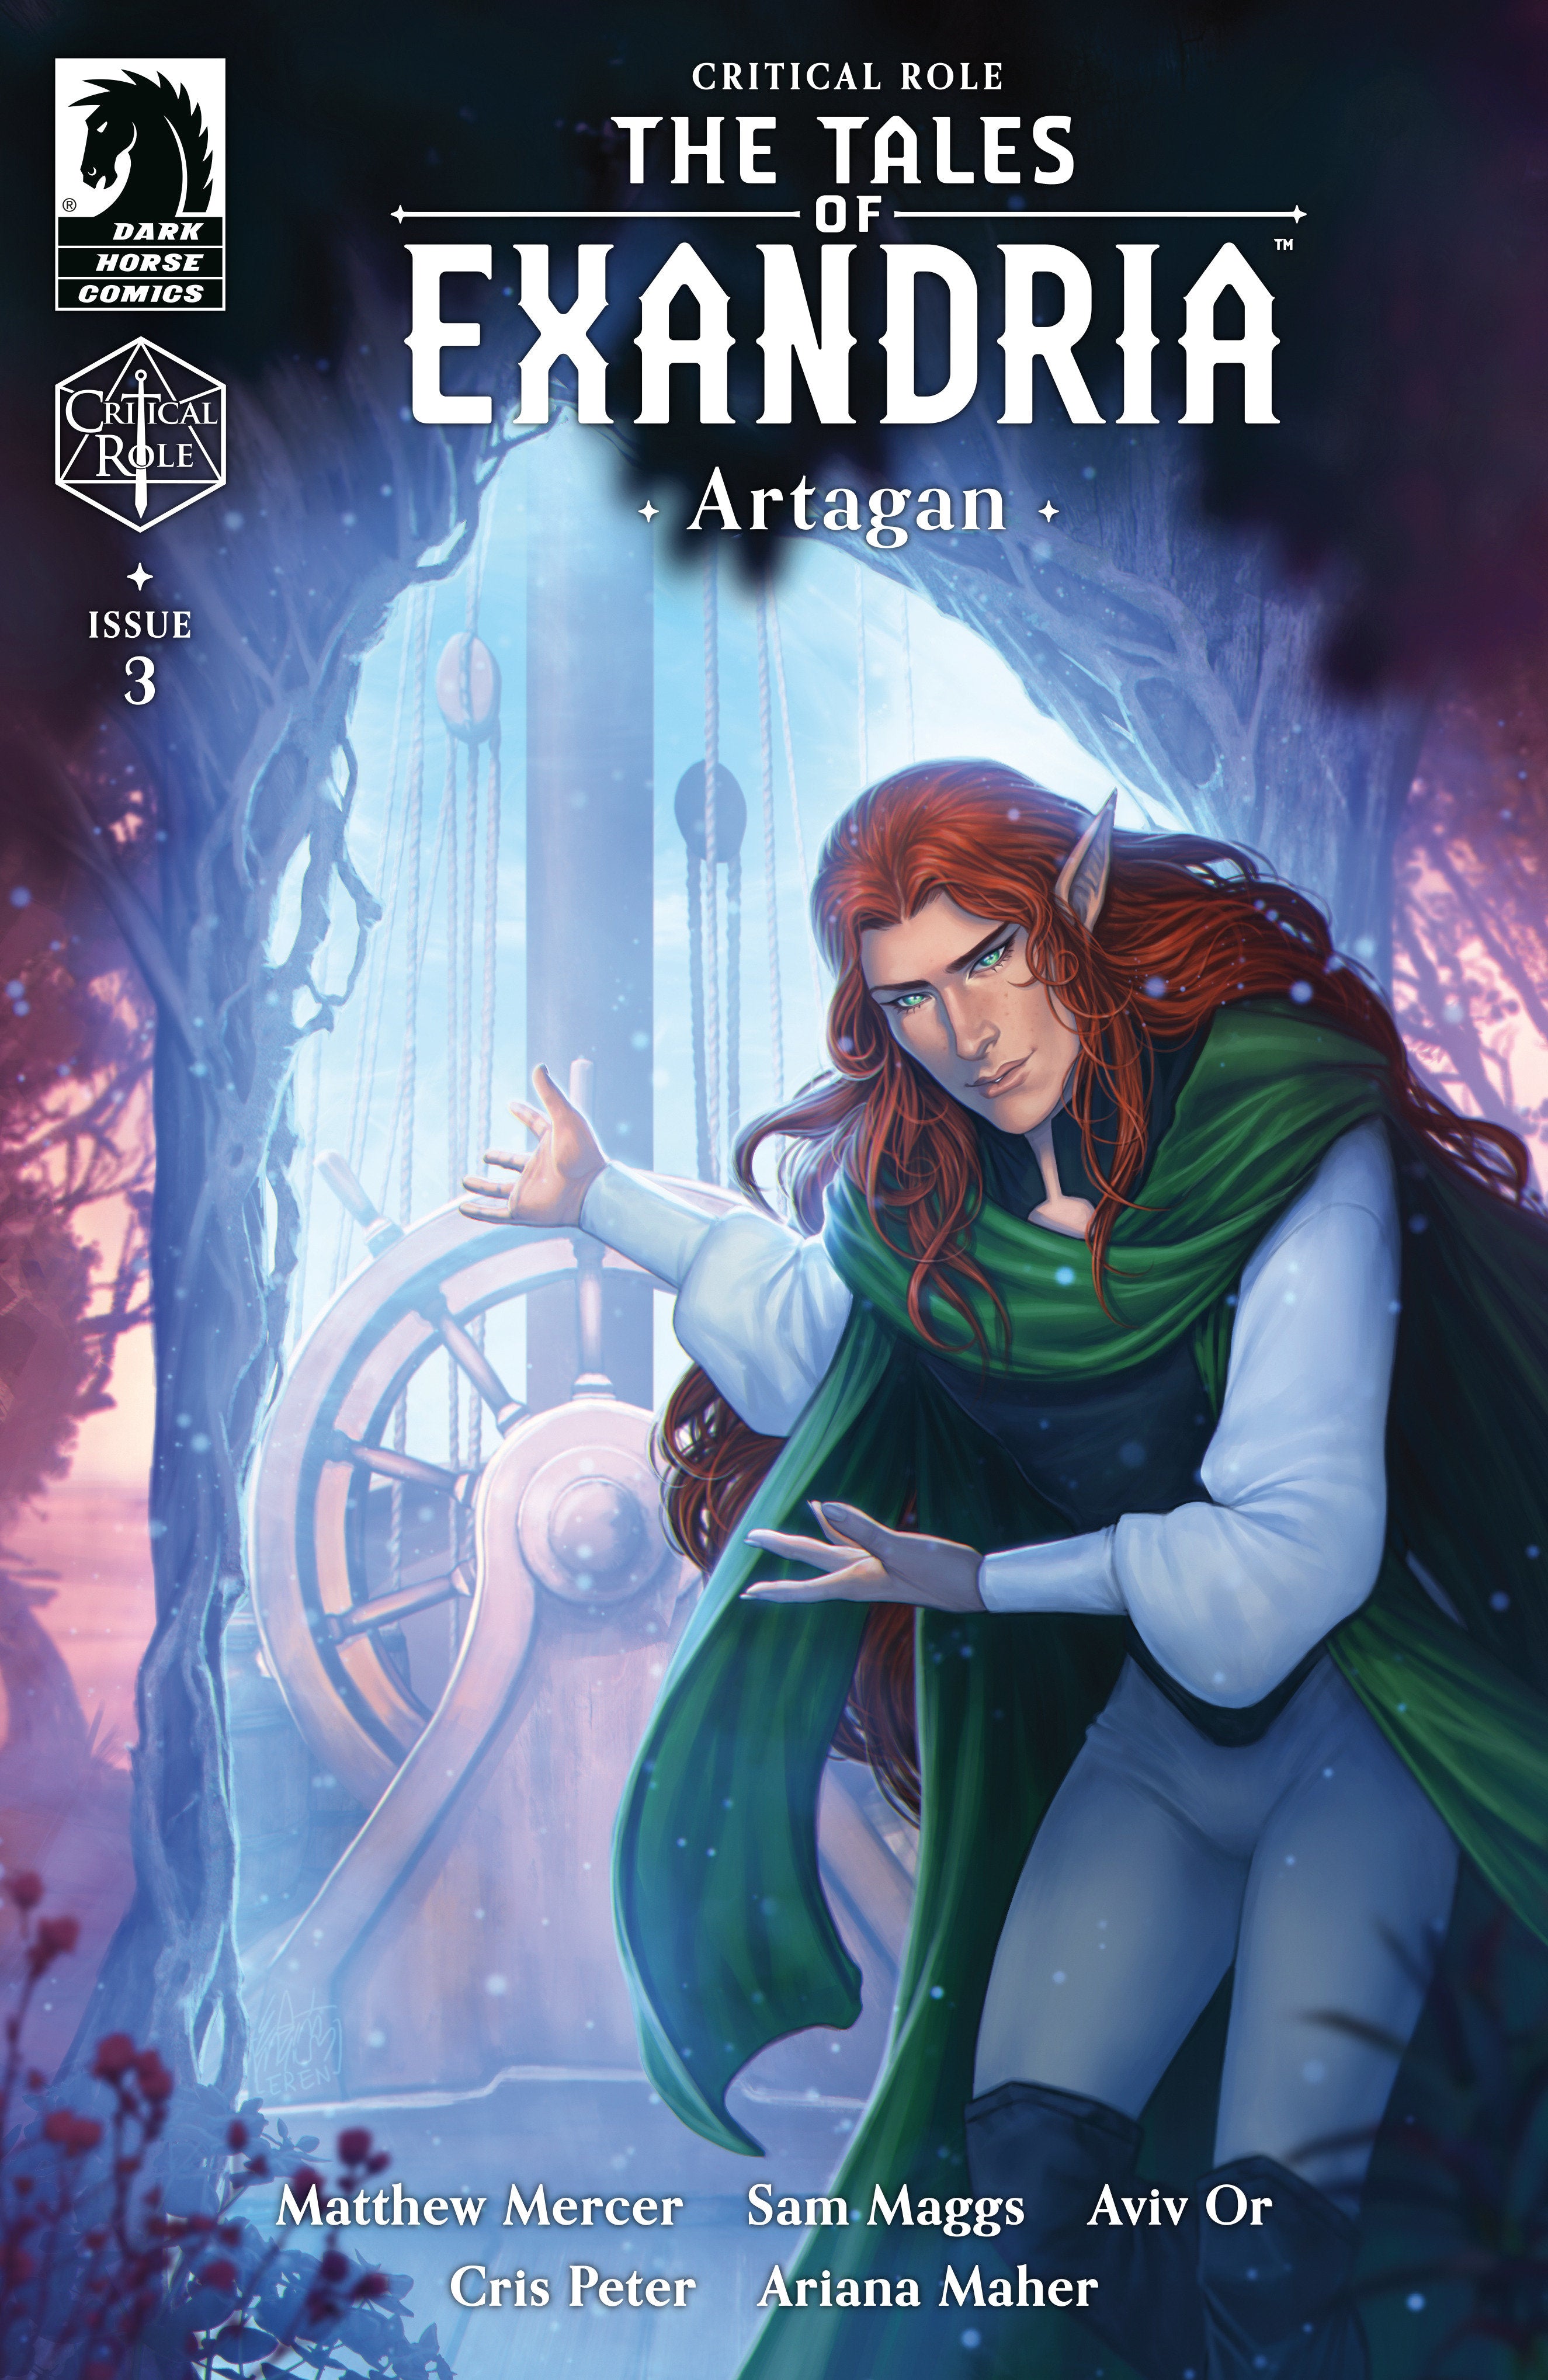 Critical Role: Tales of Exandria II--Artagan #3 (COVER A) (Toby Sharp)